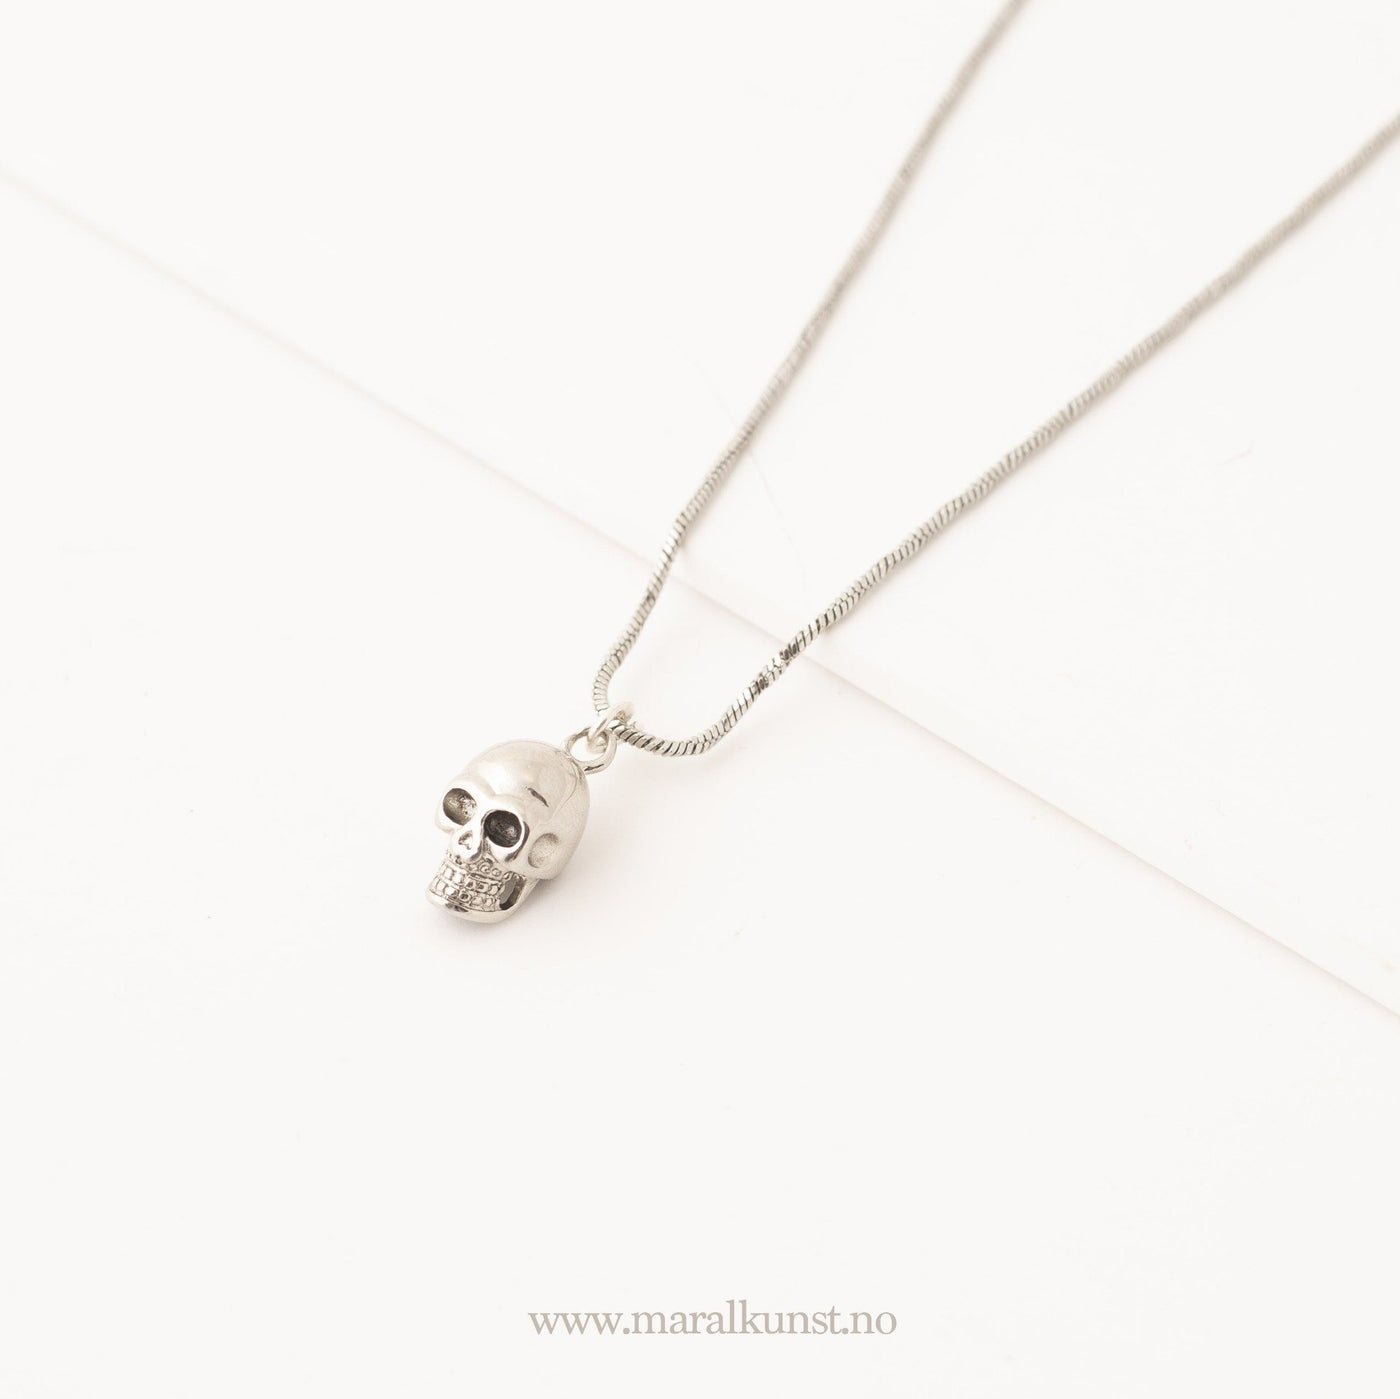 Stainless Steel Skull Necklace - Maral Kunst Jewelry